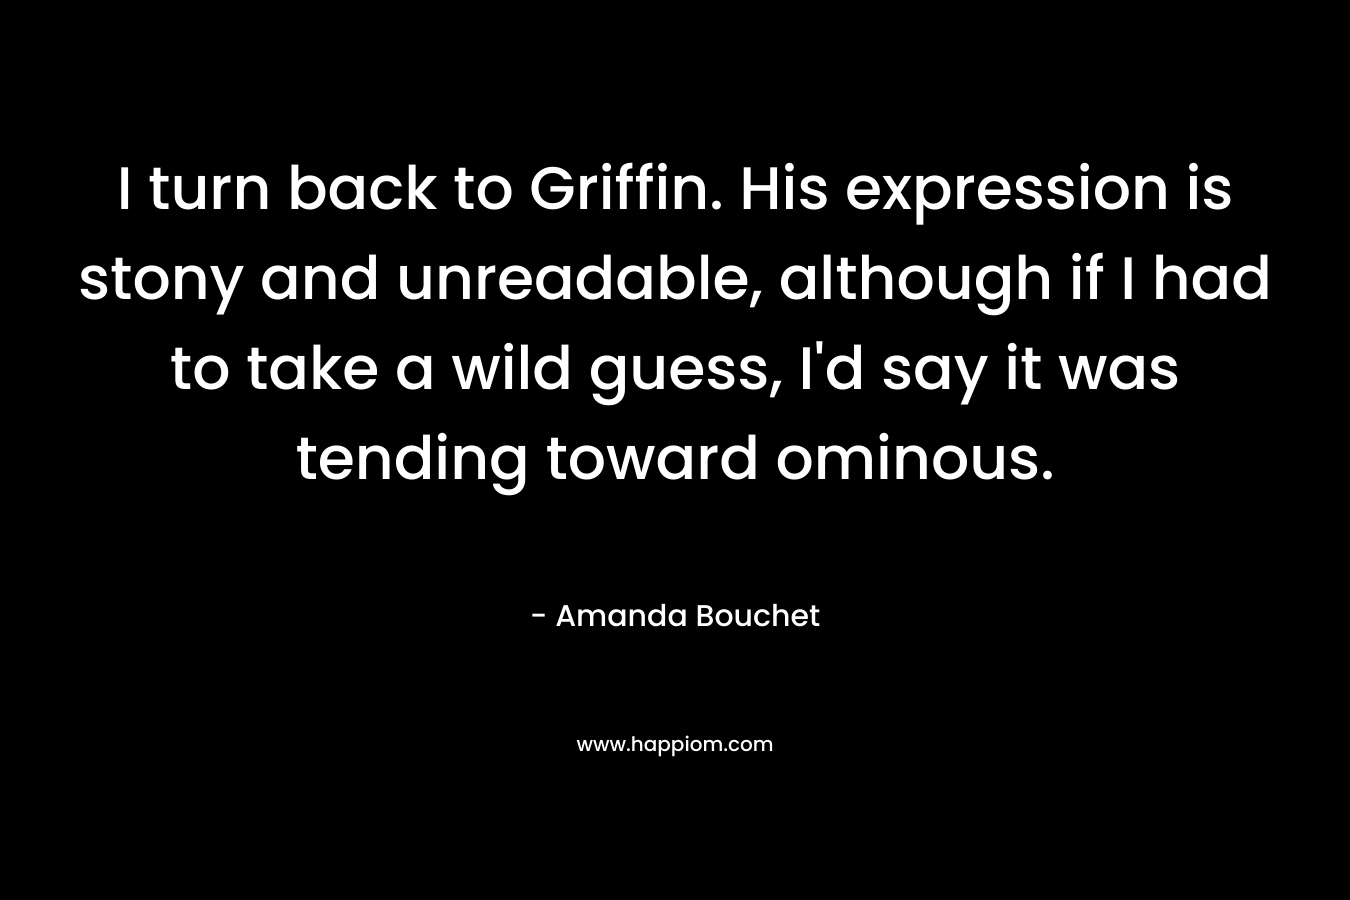 I turn back to Griffin. His expression is stony and unreadable, although if I had to take a wild guess, I’d say it was tending toward ominous. – Amanda Bouchet